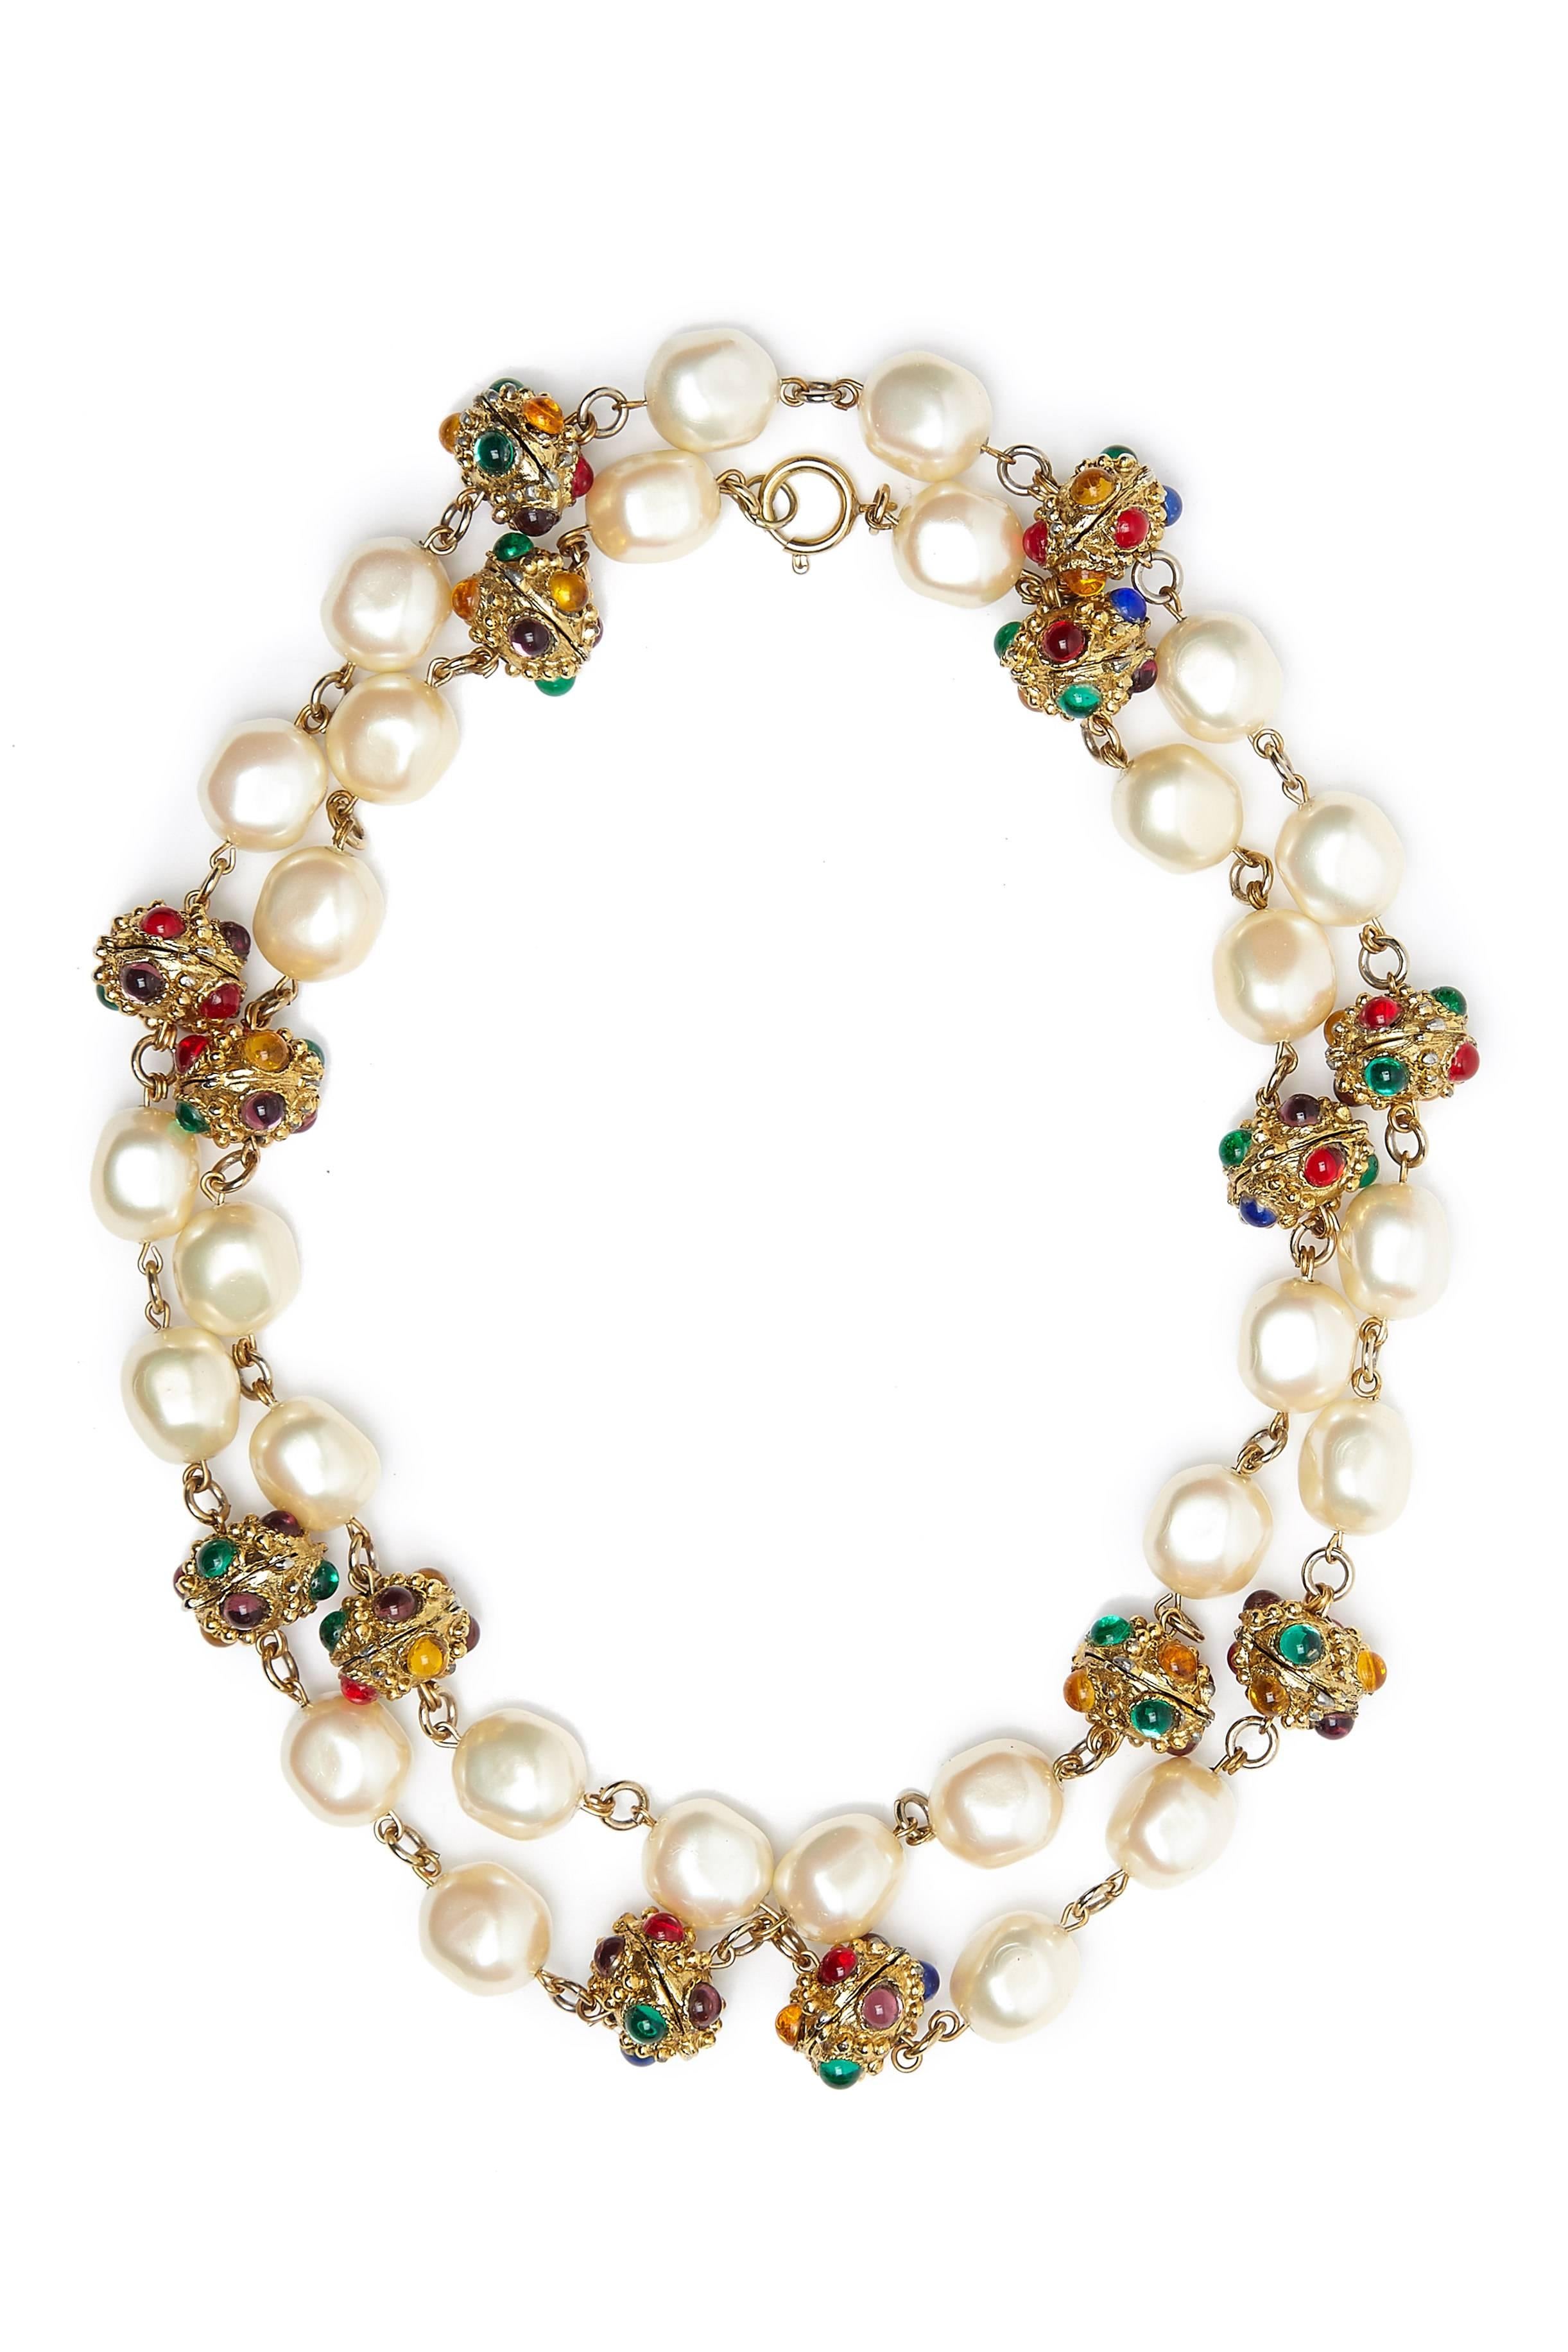 Amazing vintage 1970s statement necklace with baroque pearls and gold tone metal discs with multi-coloured gripoix glass stones. We believe this to be Chanel however the clasp has been replaced and therefore lost the Chanel signature but is typical